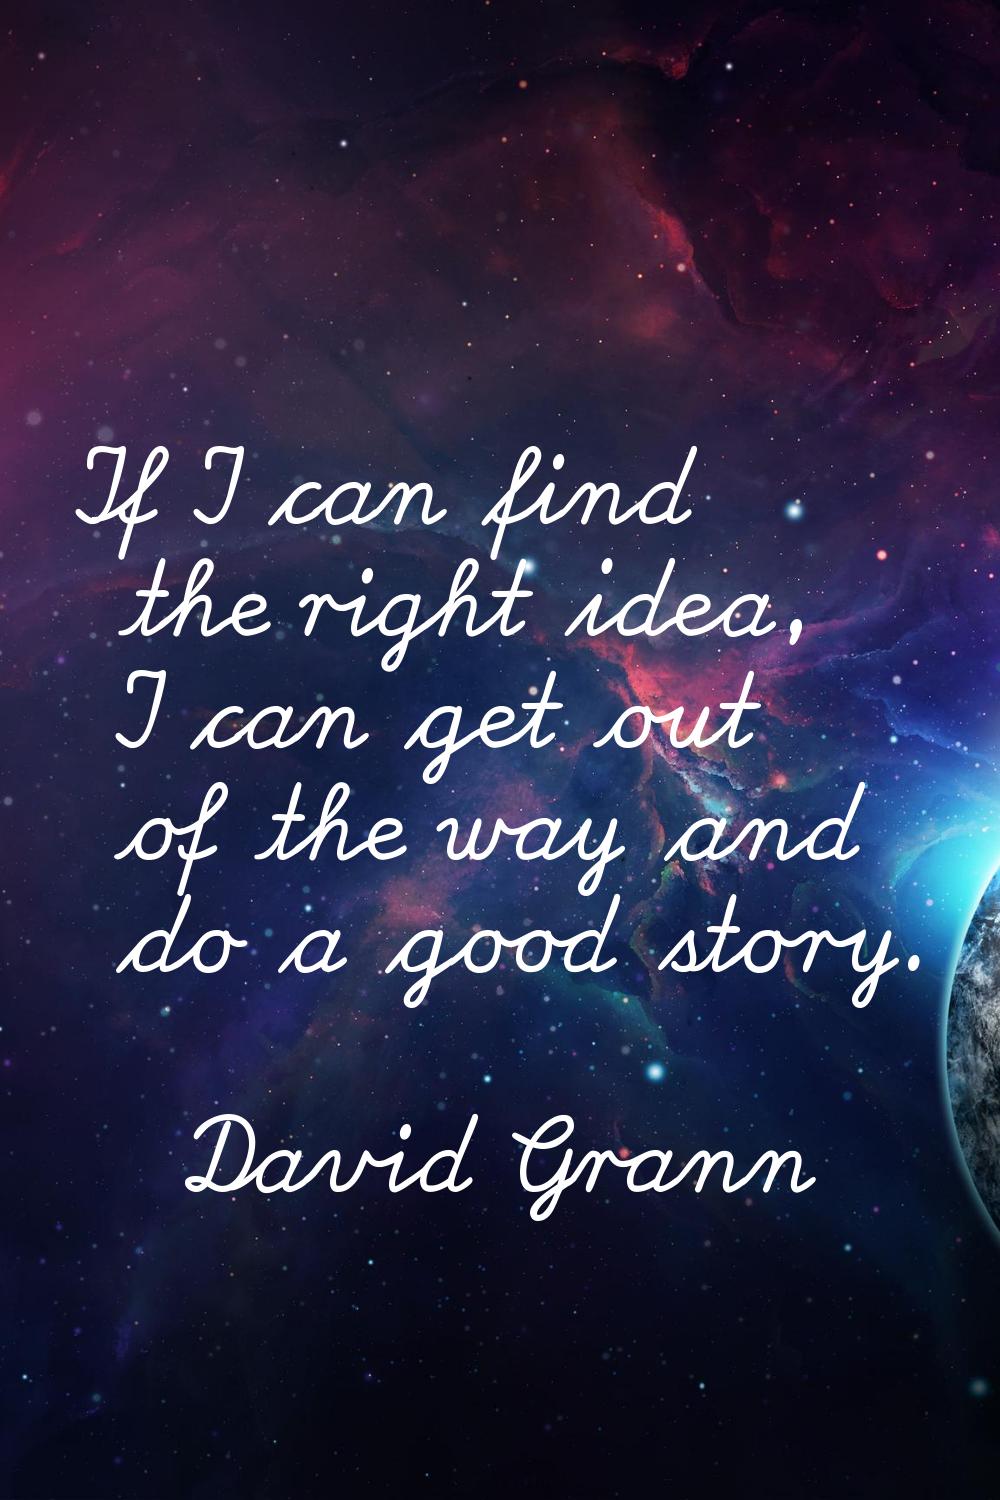 If I can find the right idea, I can get out of the way and do a good story.